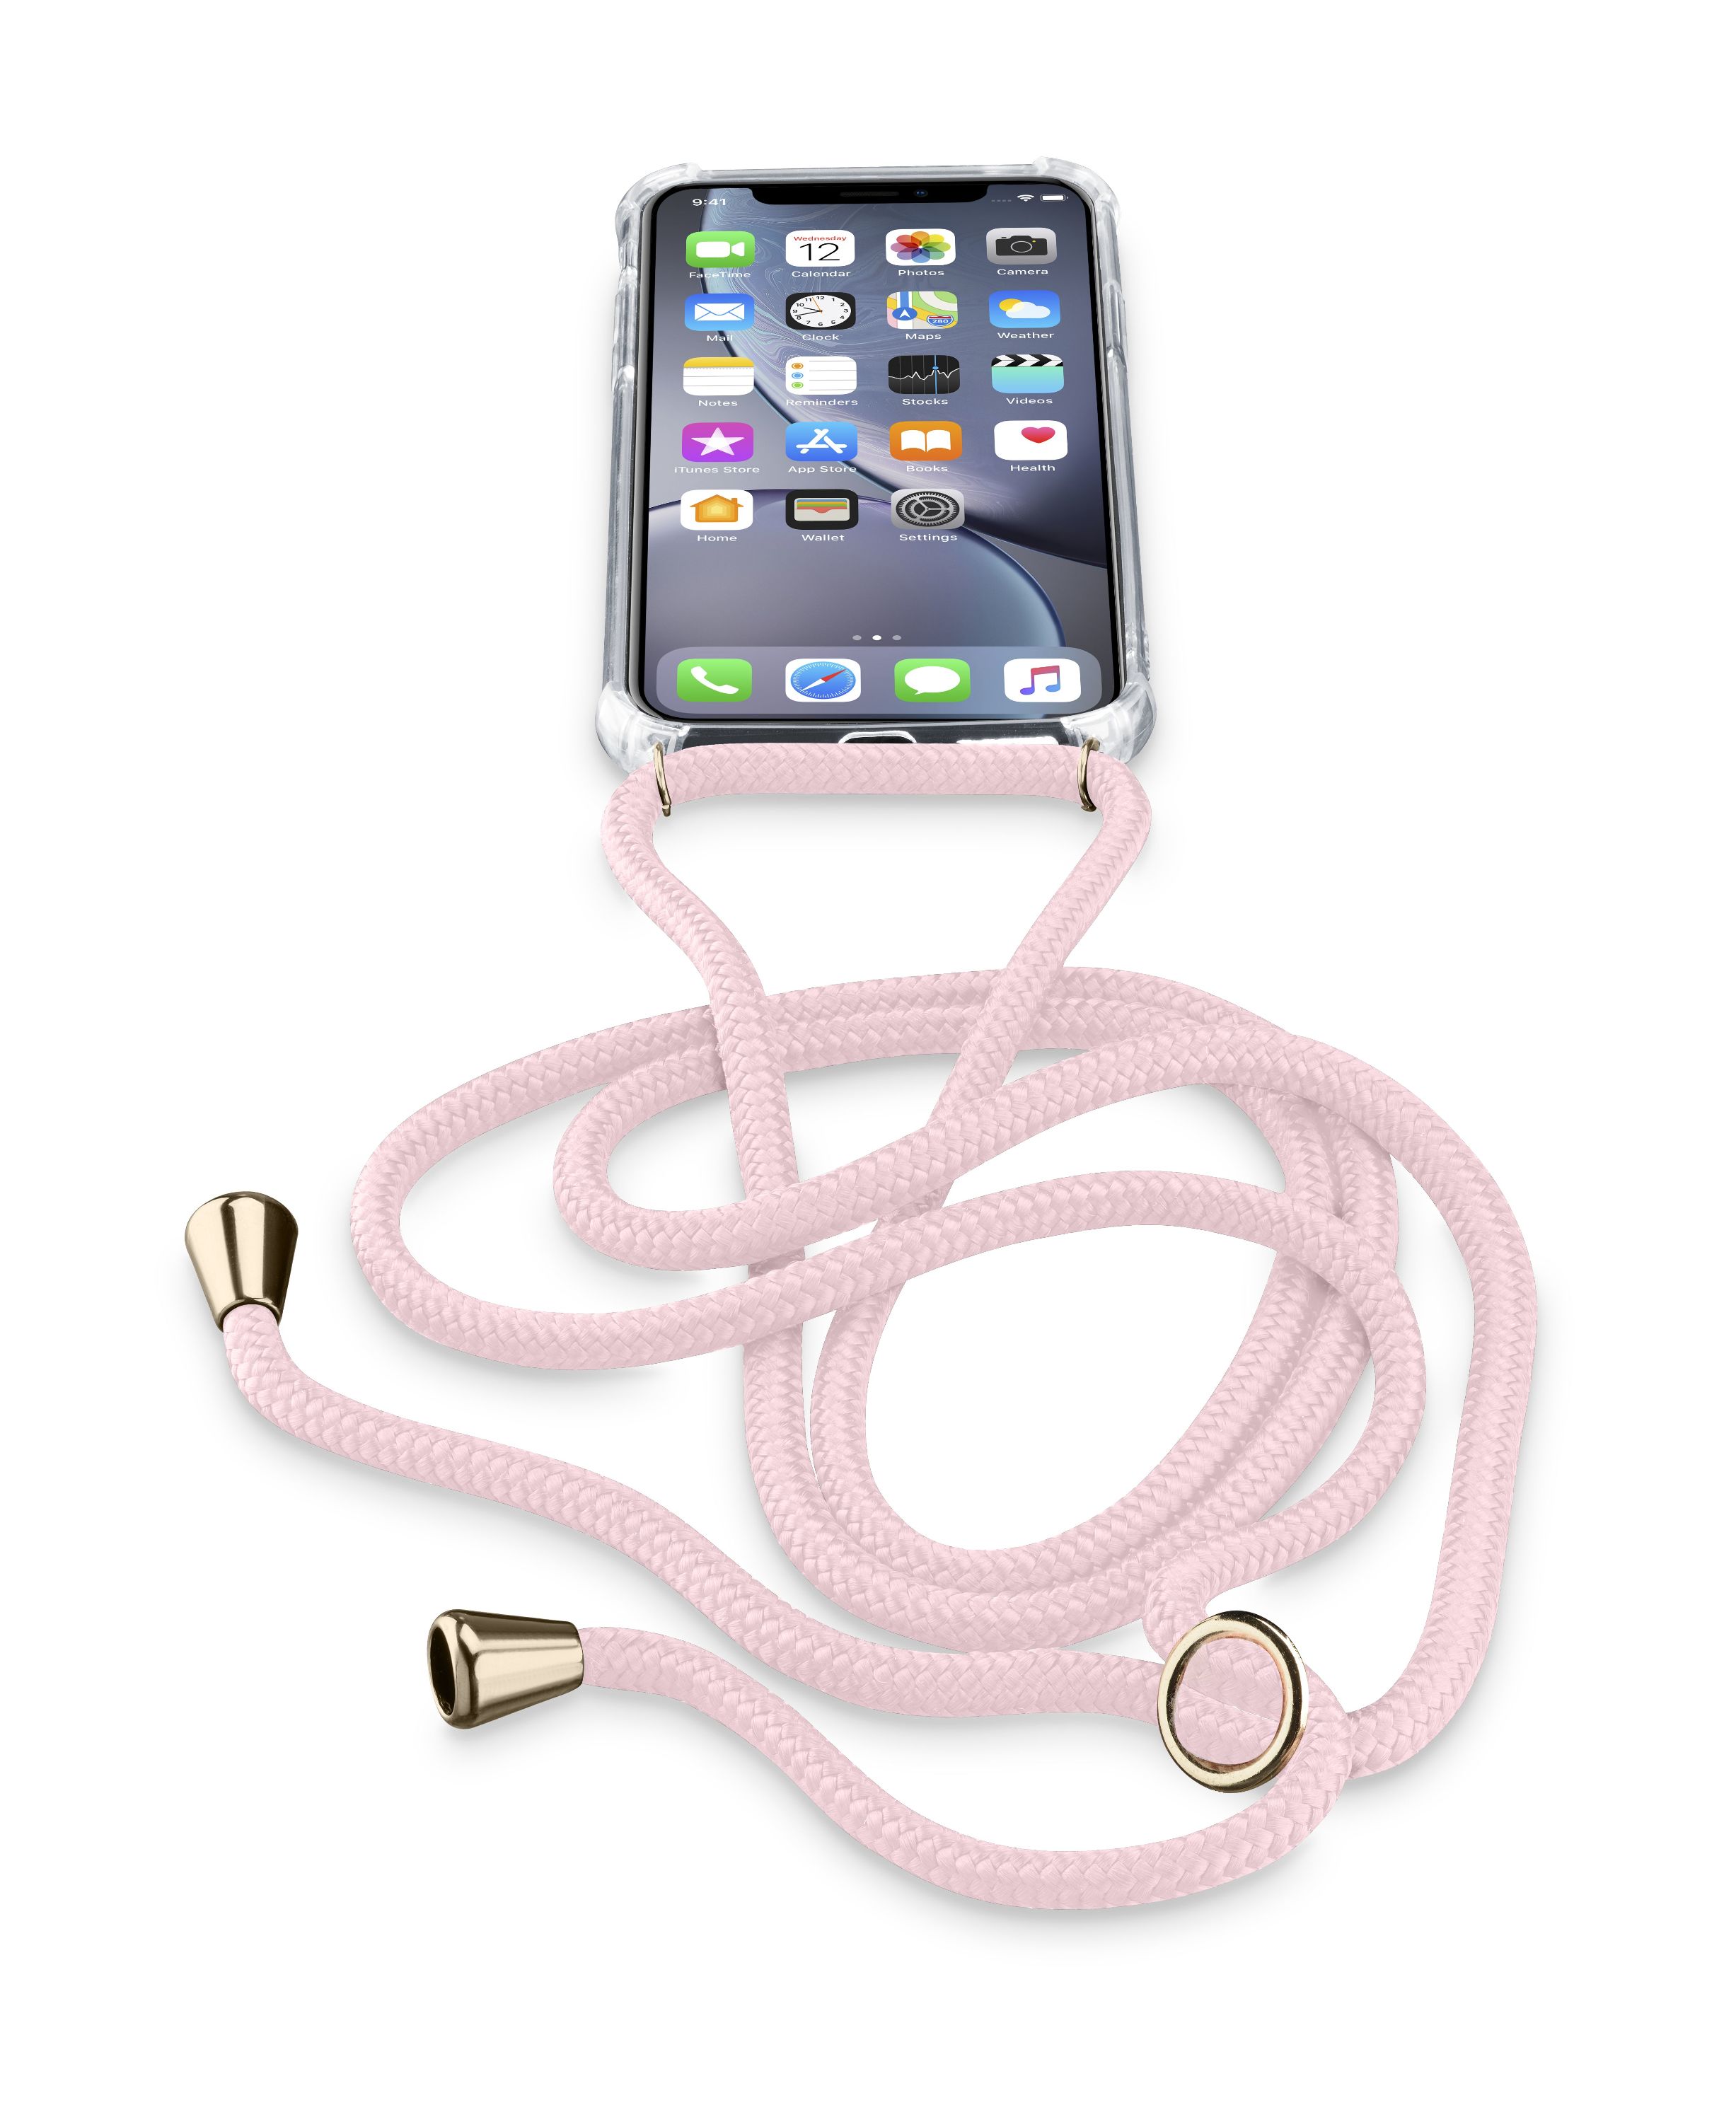 iPhone Xr, case adjustable cord, pink